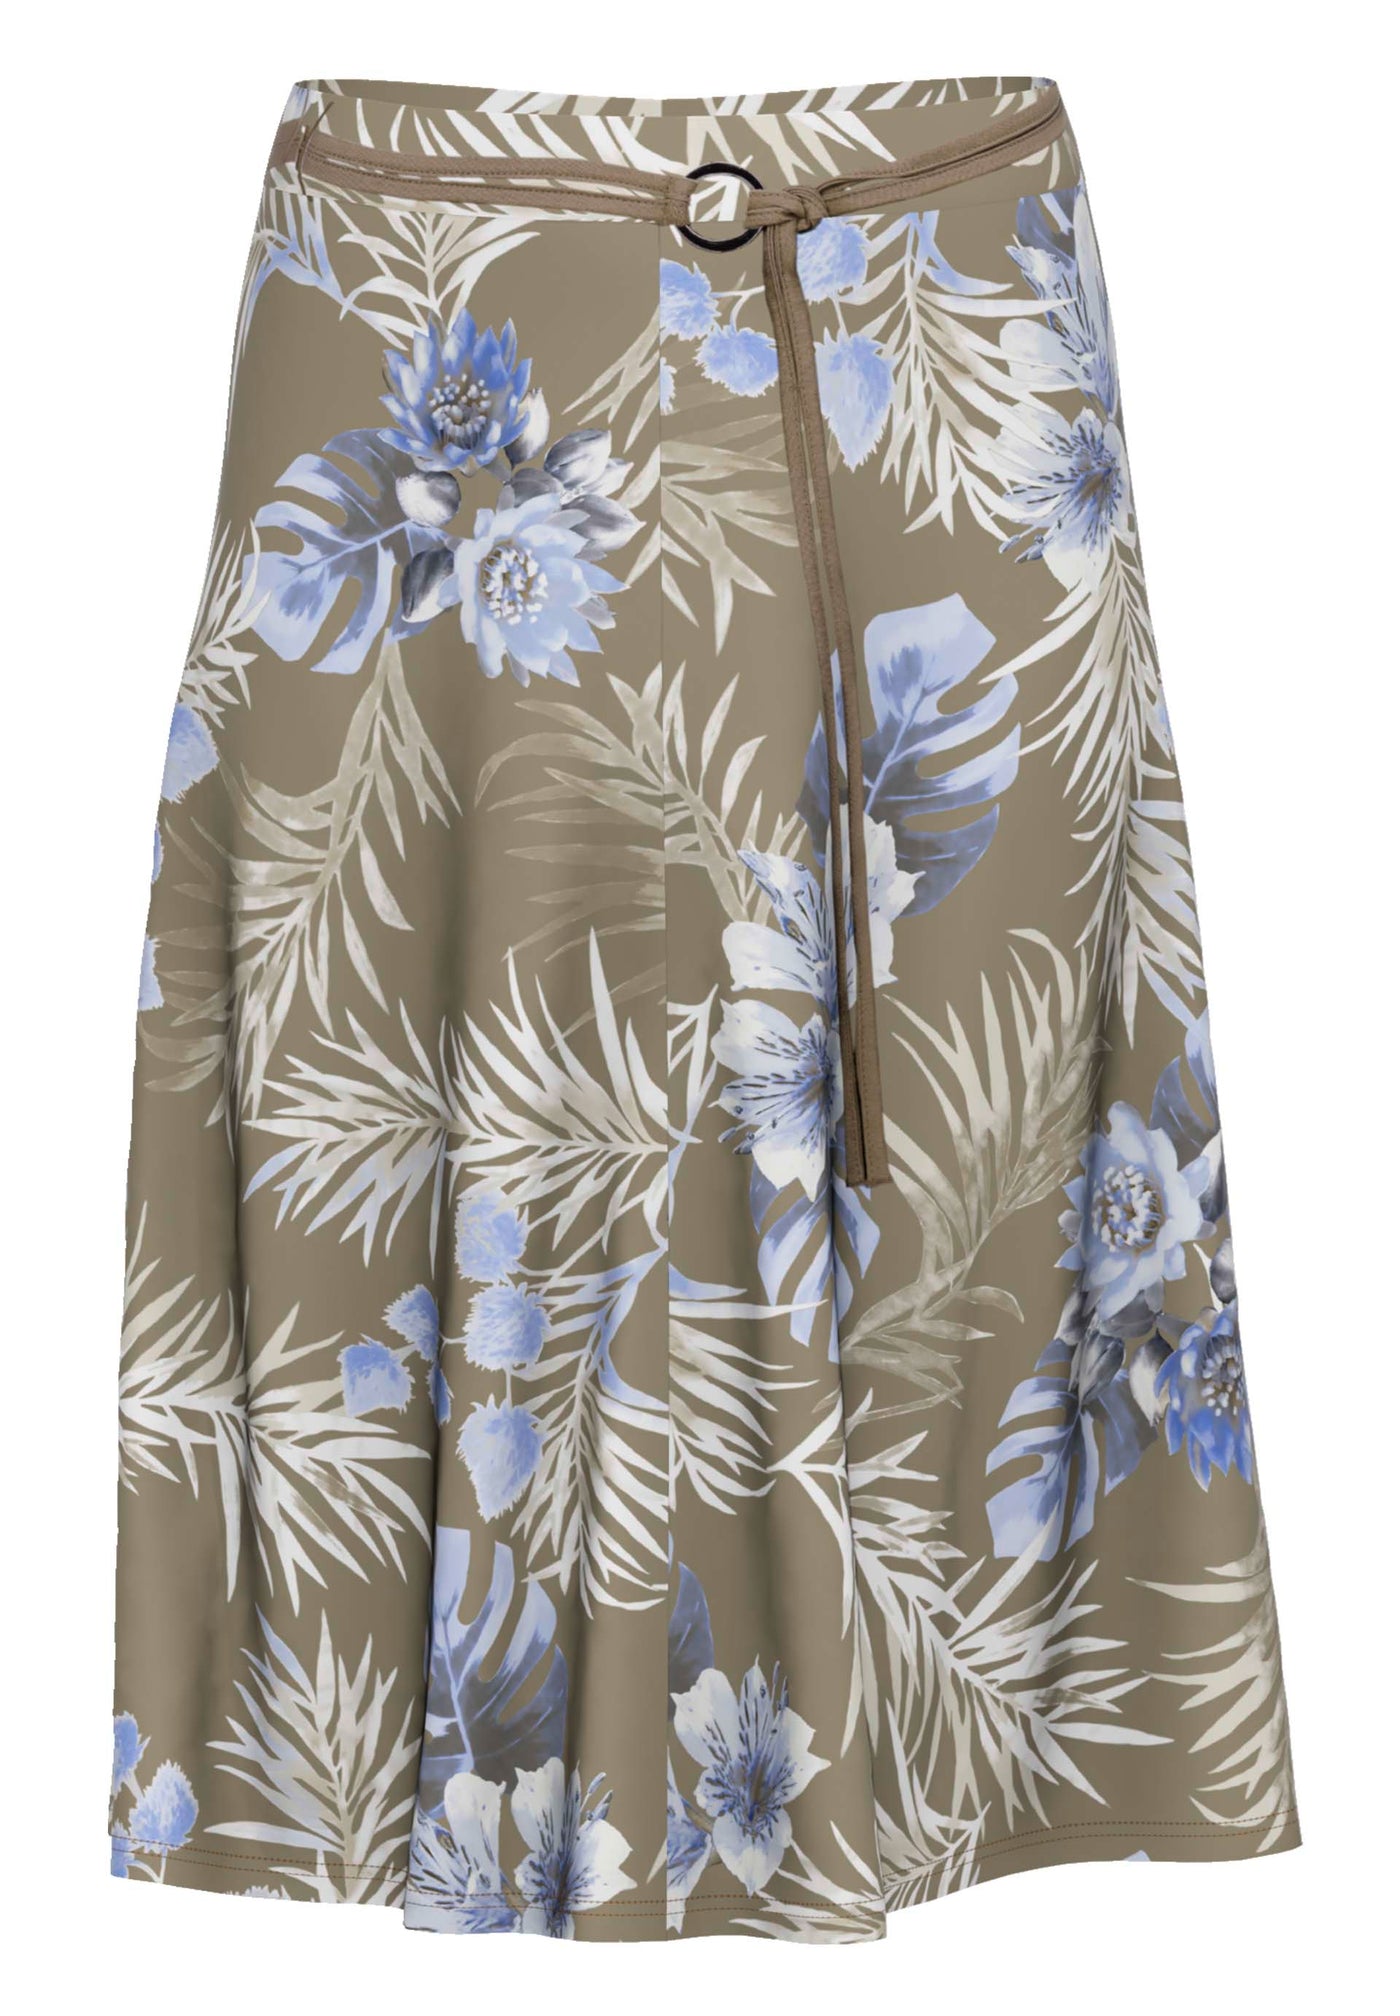 Brown/Blue/Beige Abstract Floral Print Skirt With Rope Belt Detailing